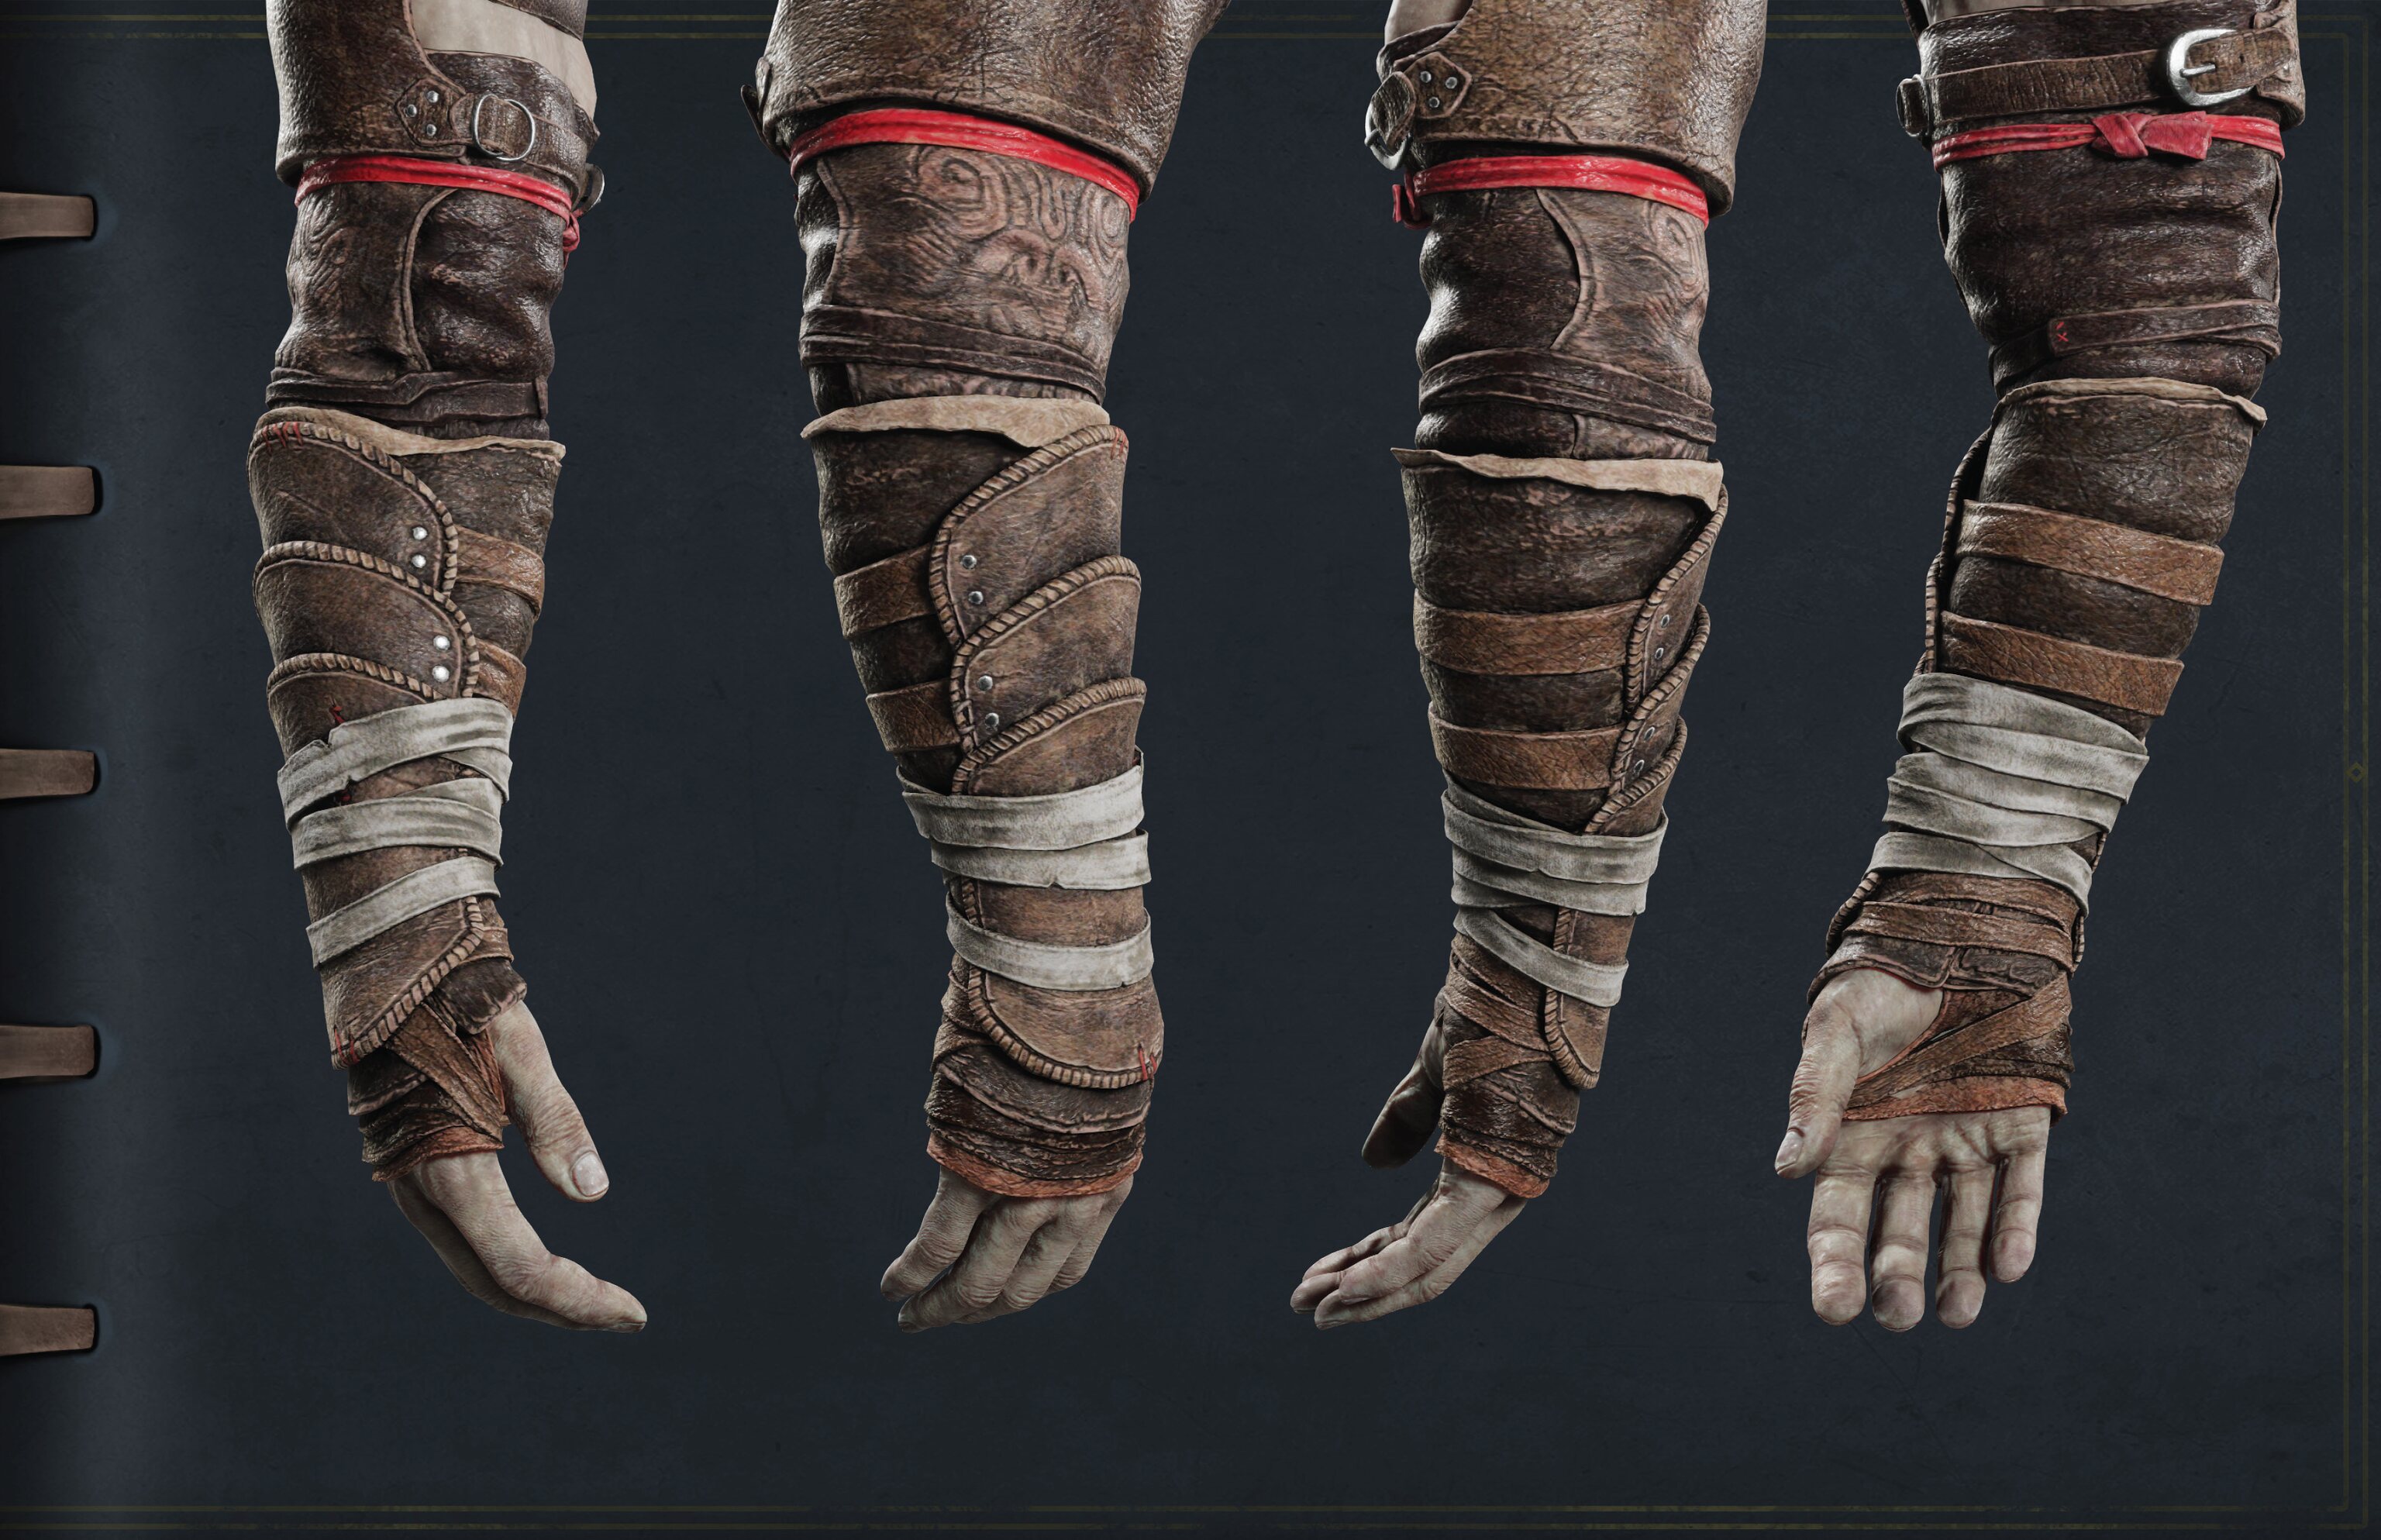 This image is an excerpt from the Cosplay Guide showing multiple angles of Kratos’ right arm.